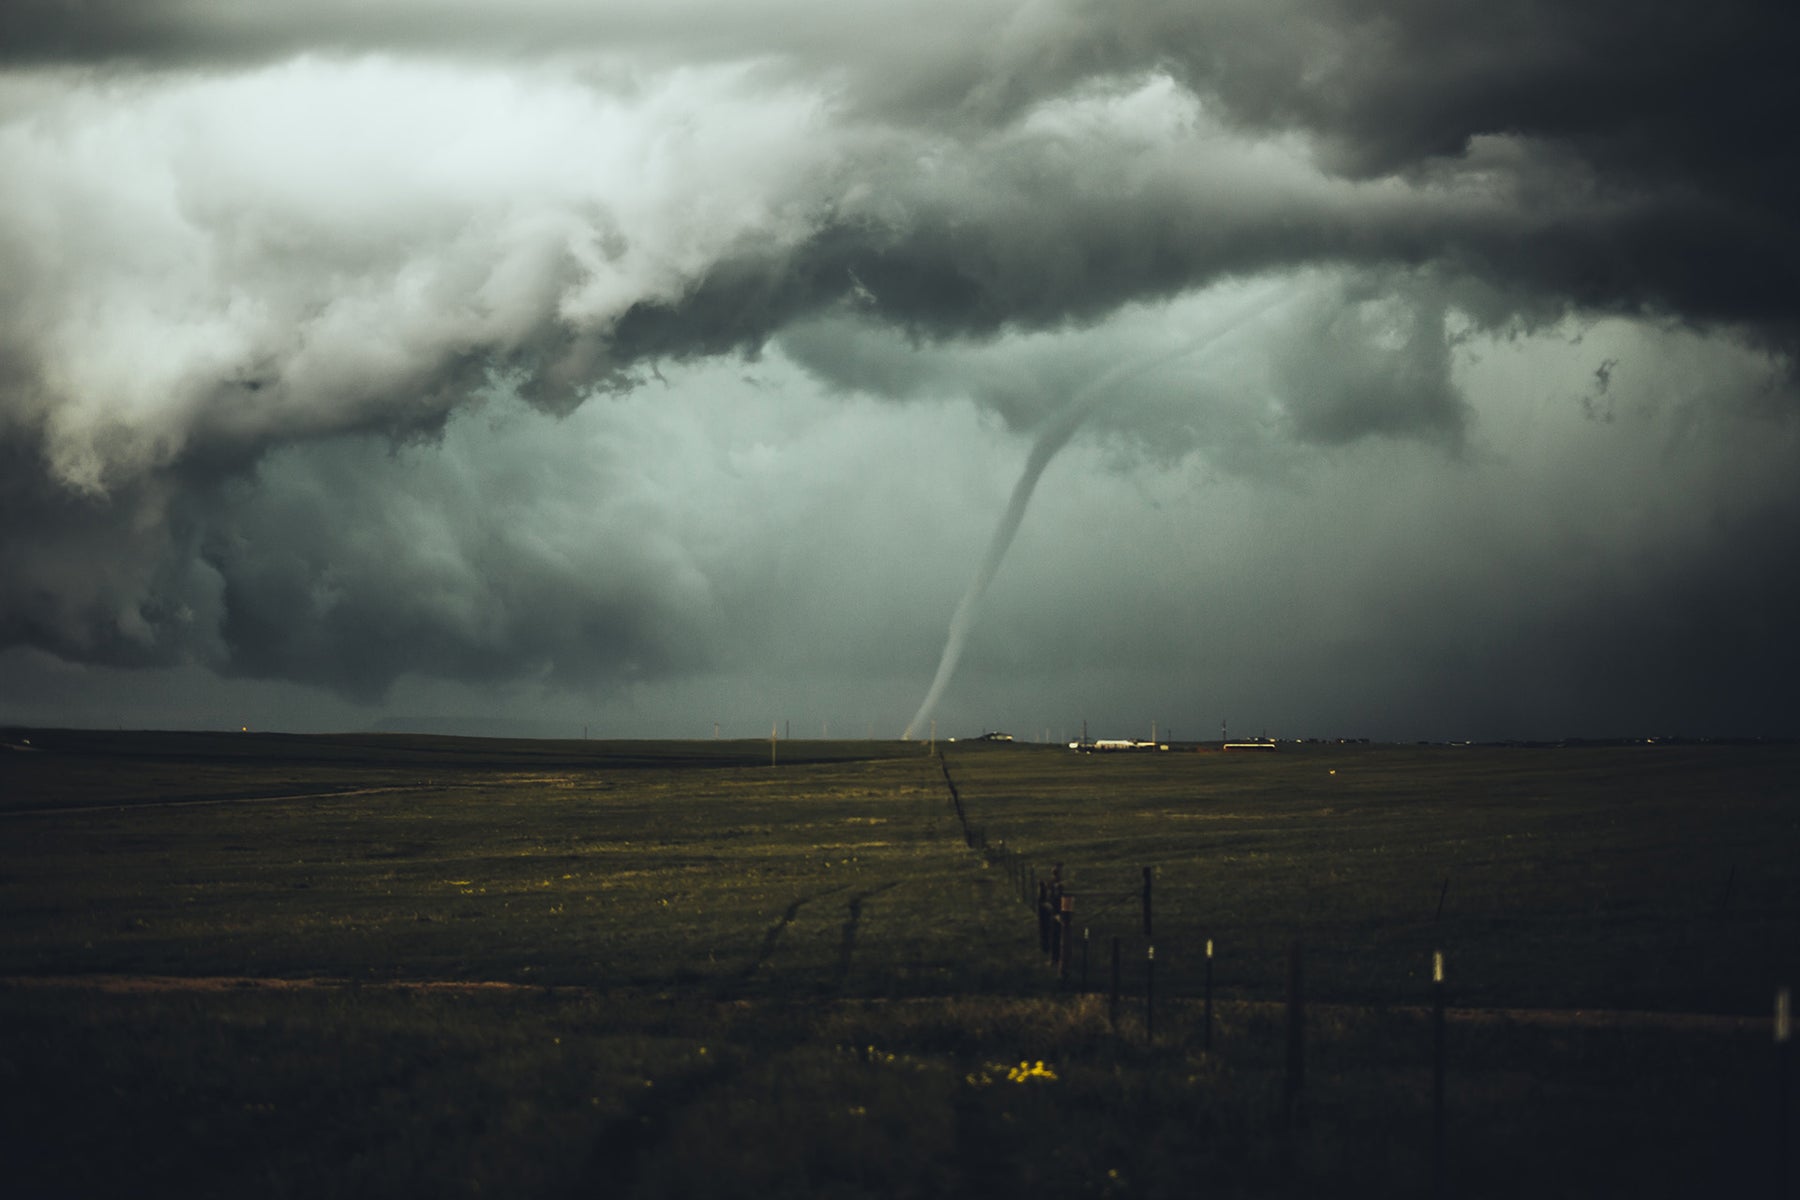 Benefits of GPS for Storm Chasing and How It Improves Safety